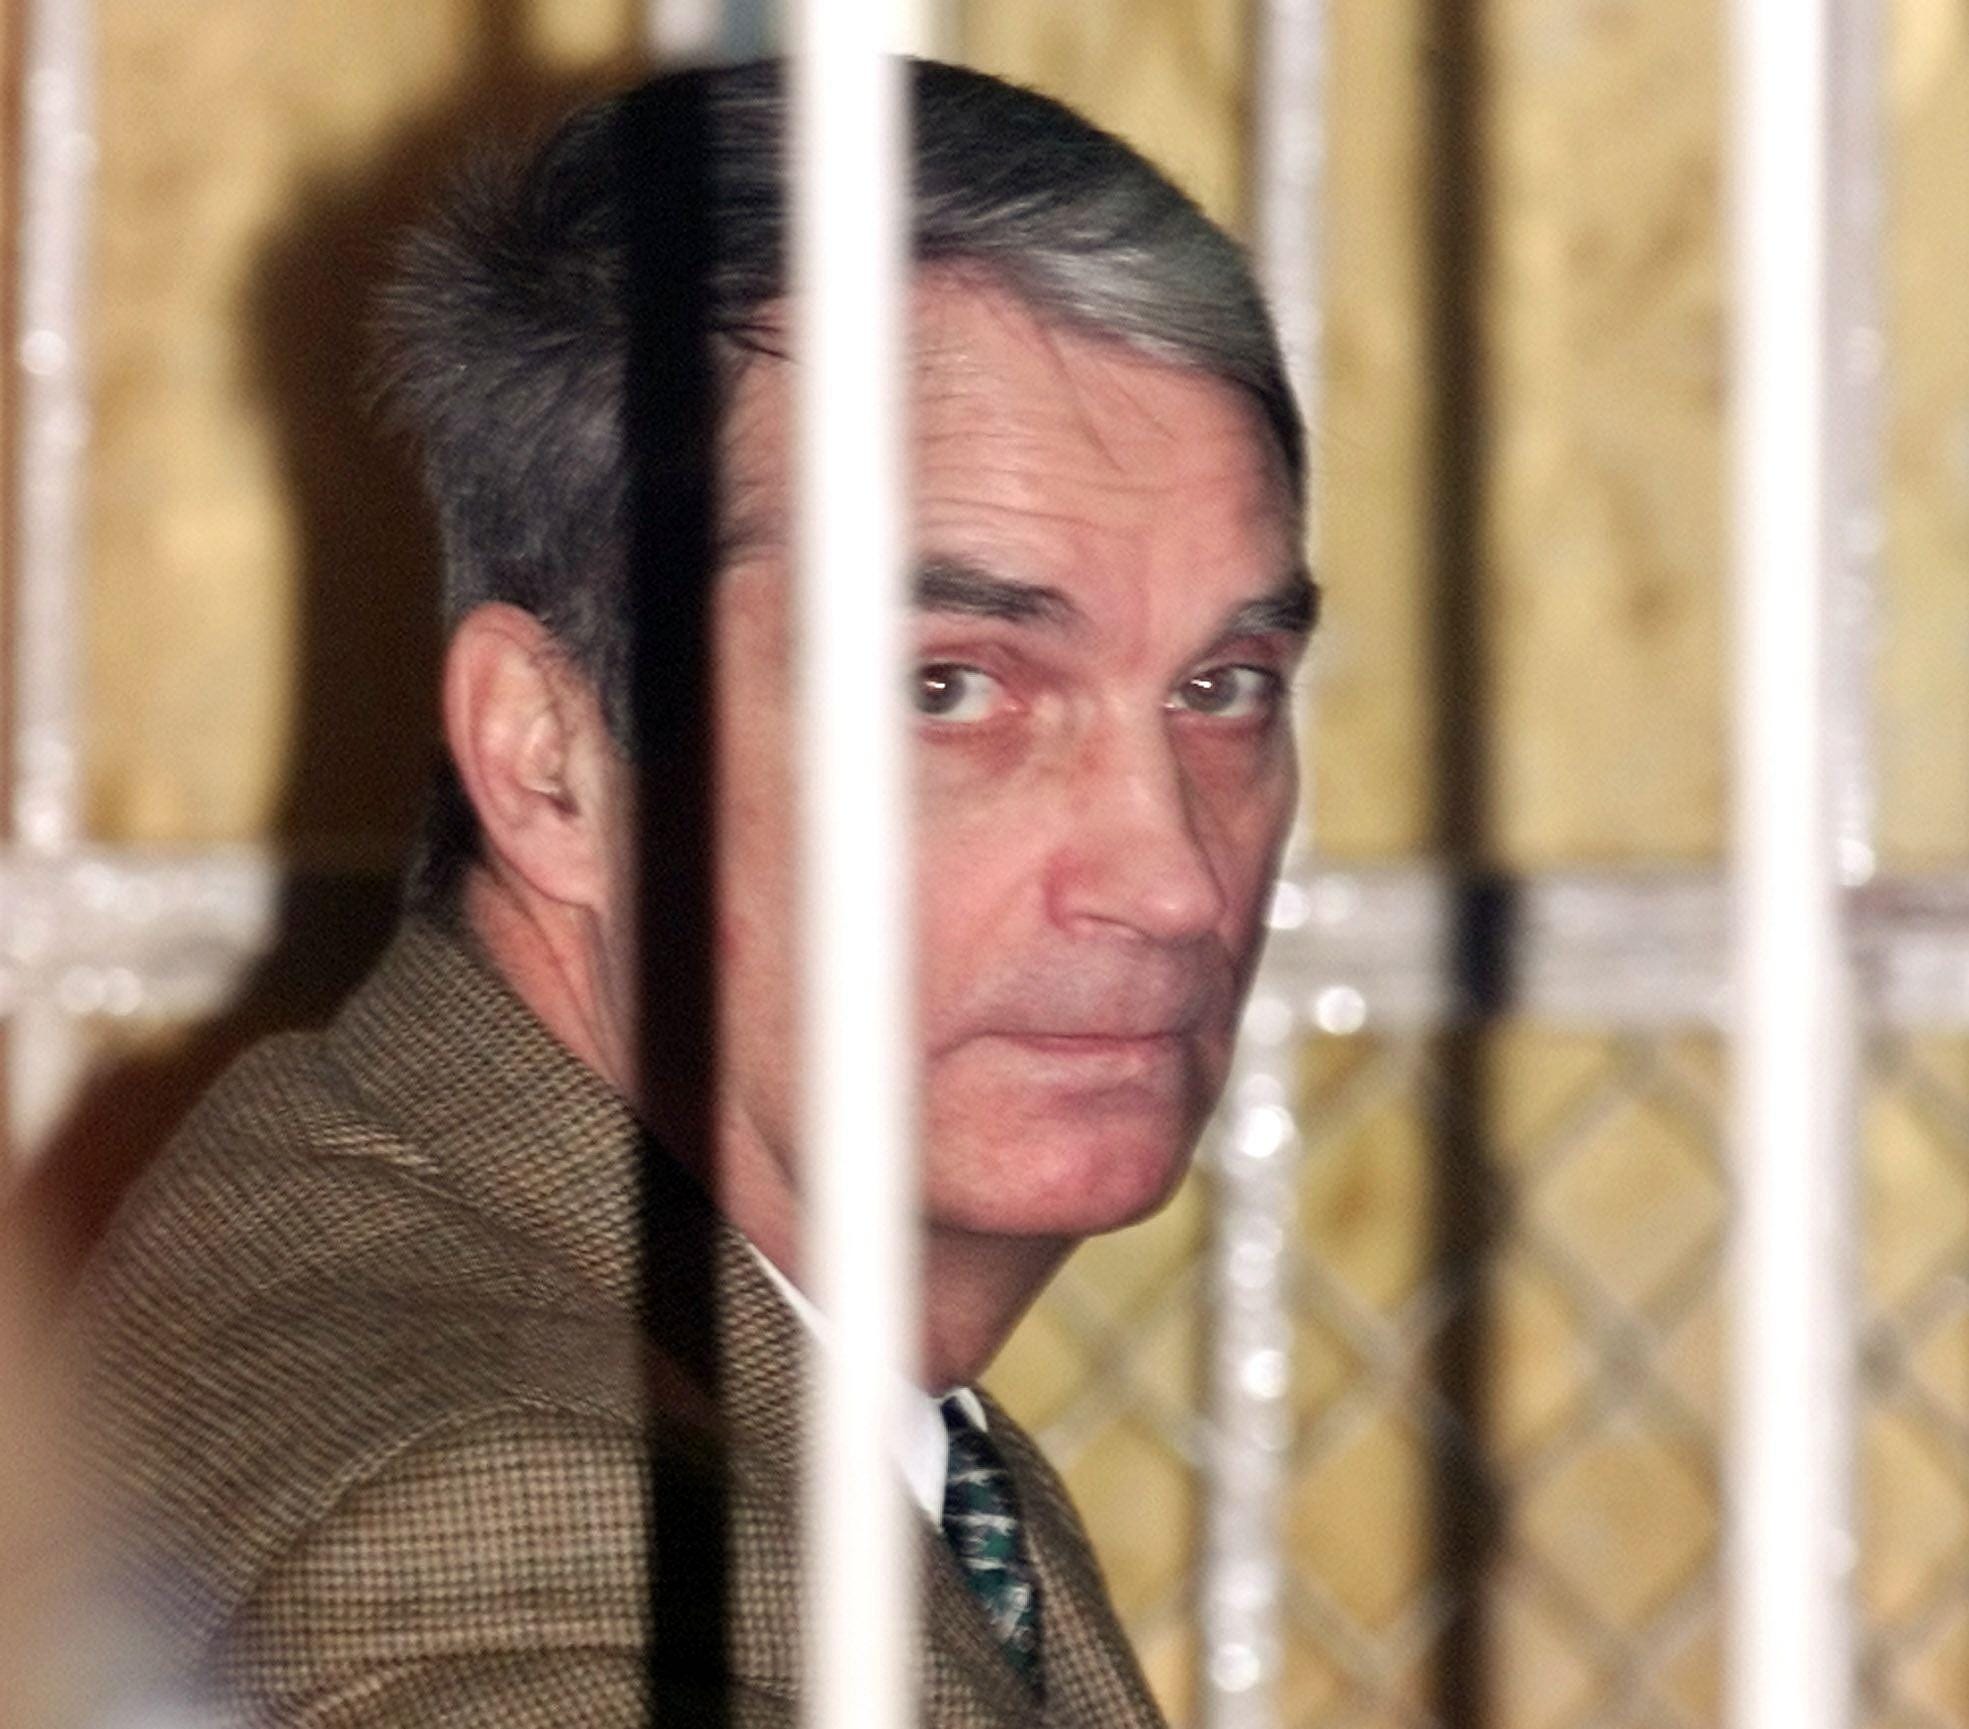 U.S. businessman Edmond Pope sits behind bars during a closed-door spy trial against him in Moscow, December 1, 2000. U.S. businessman Edmond Pope's lawyer asked a Moscow judge to acquit his client of espionage charges, saying in closing statements that prosecutors had failed to prove Pope did anything illegal.